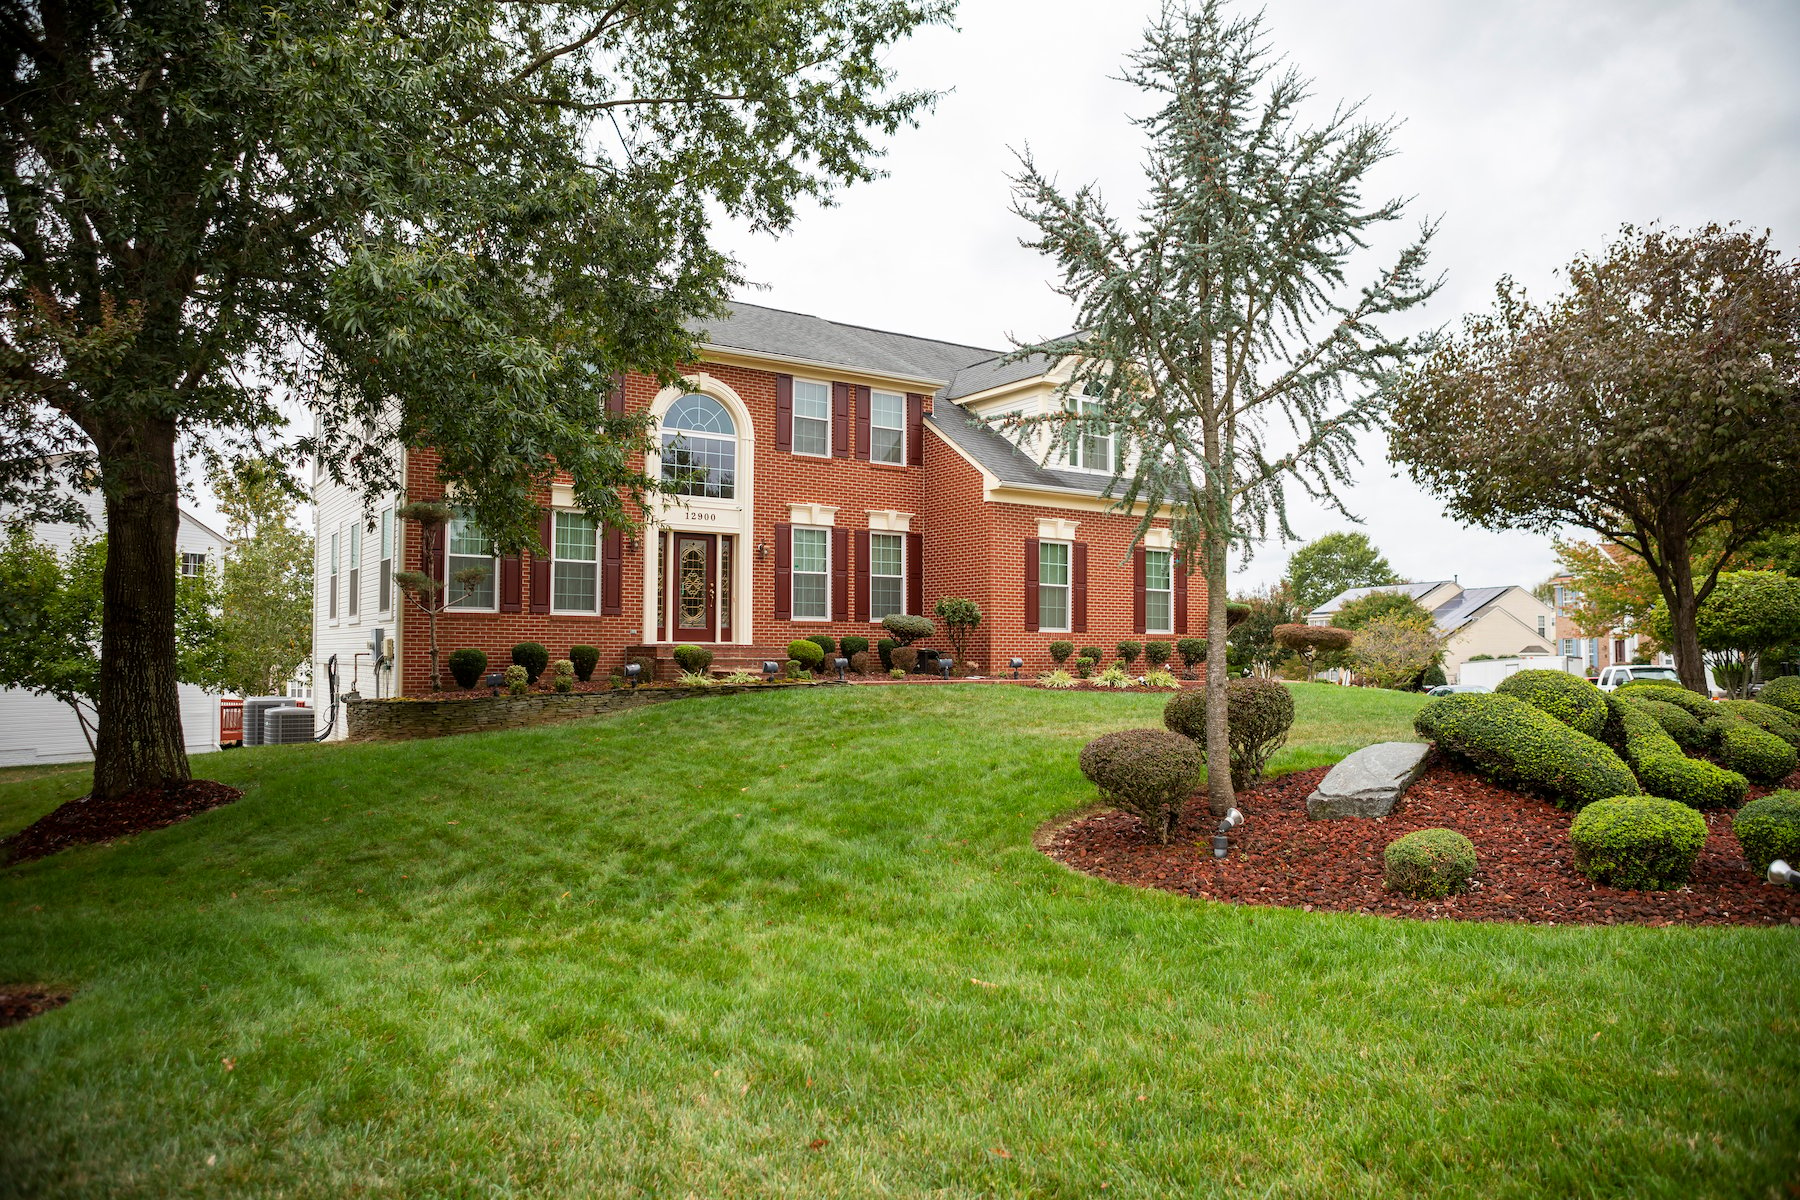 Healthy lawn cared for by Natural Green in Maryland